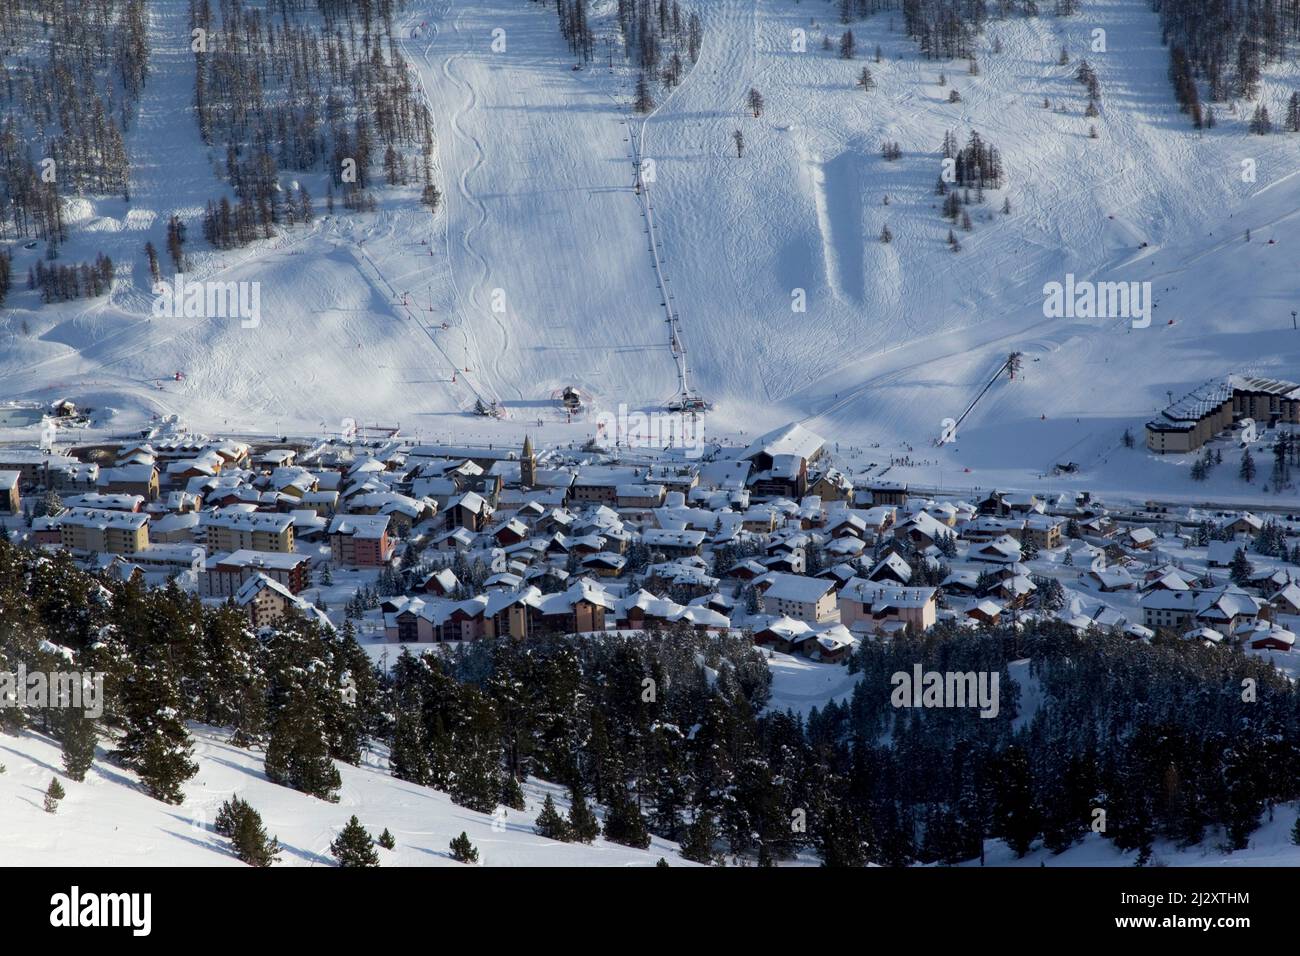 Montgenevre (French Alp, south-eastern France): overview of the ski resort covered in snow in winter Stock Photo